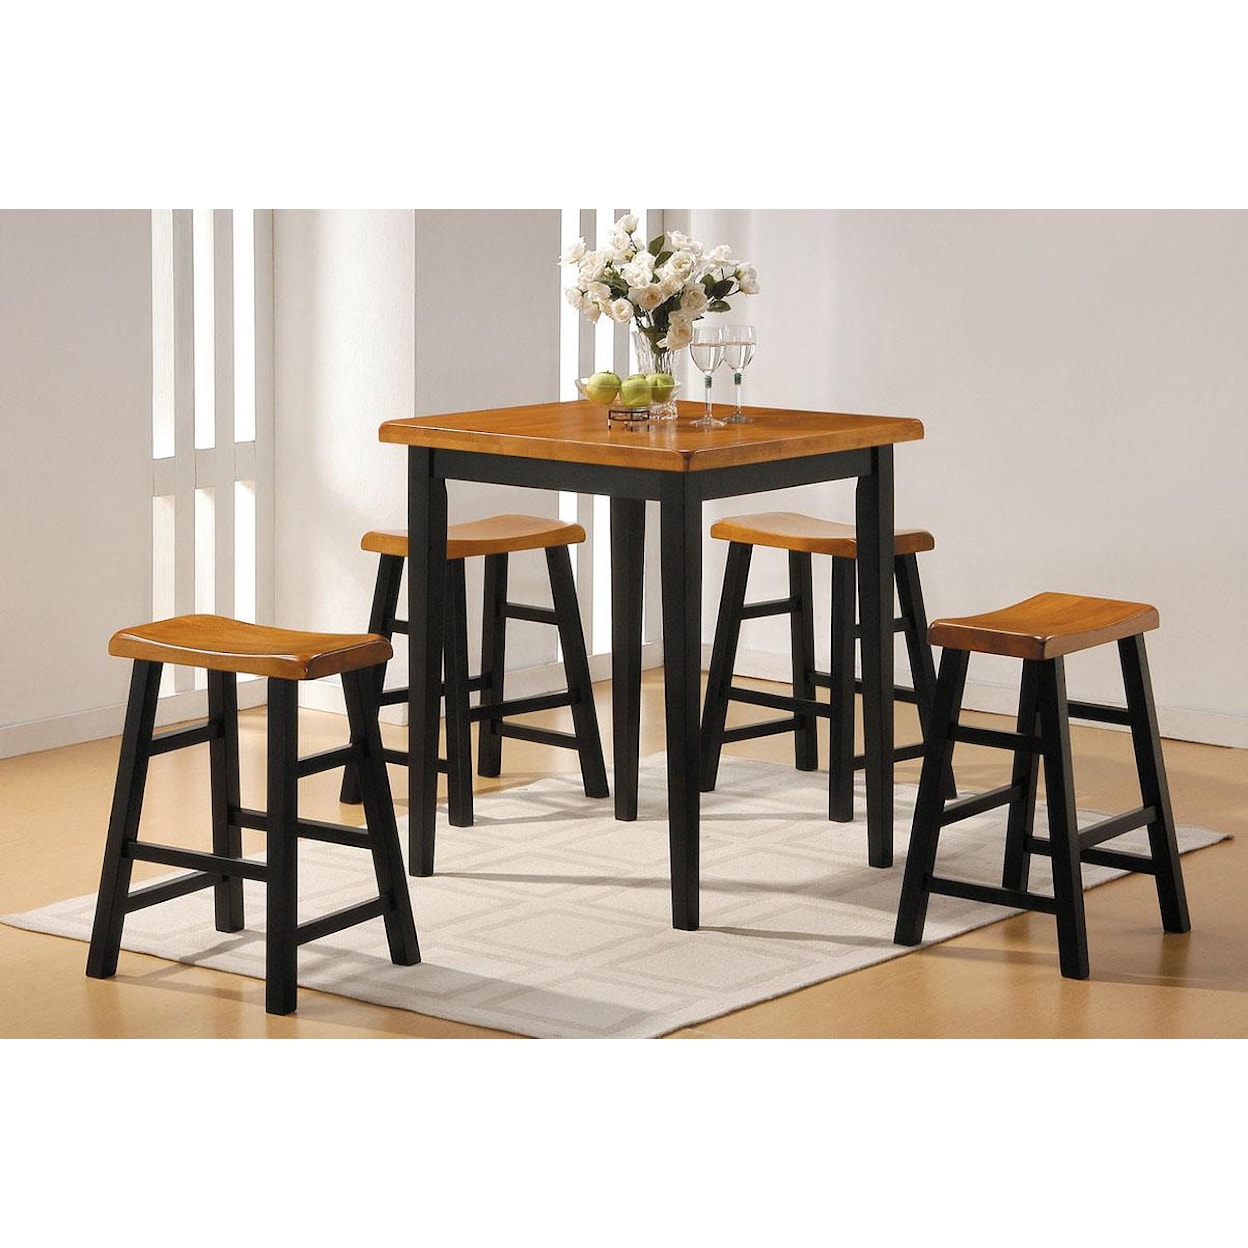 Acme Furniture Gaucho 5-Piece Counter Height Dining Set